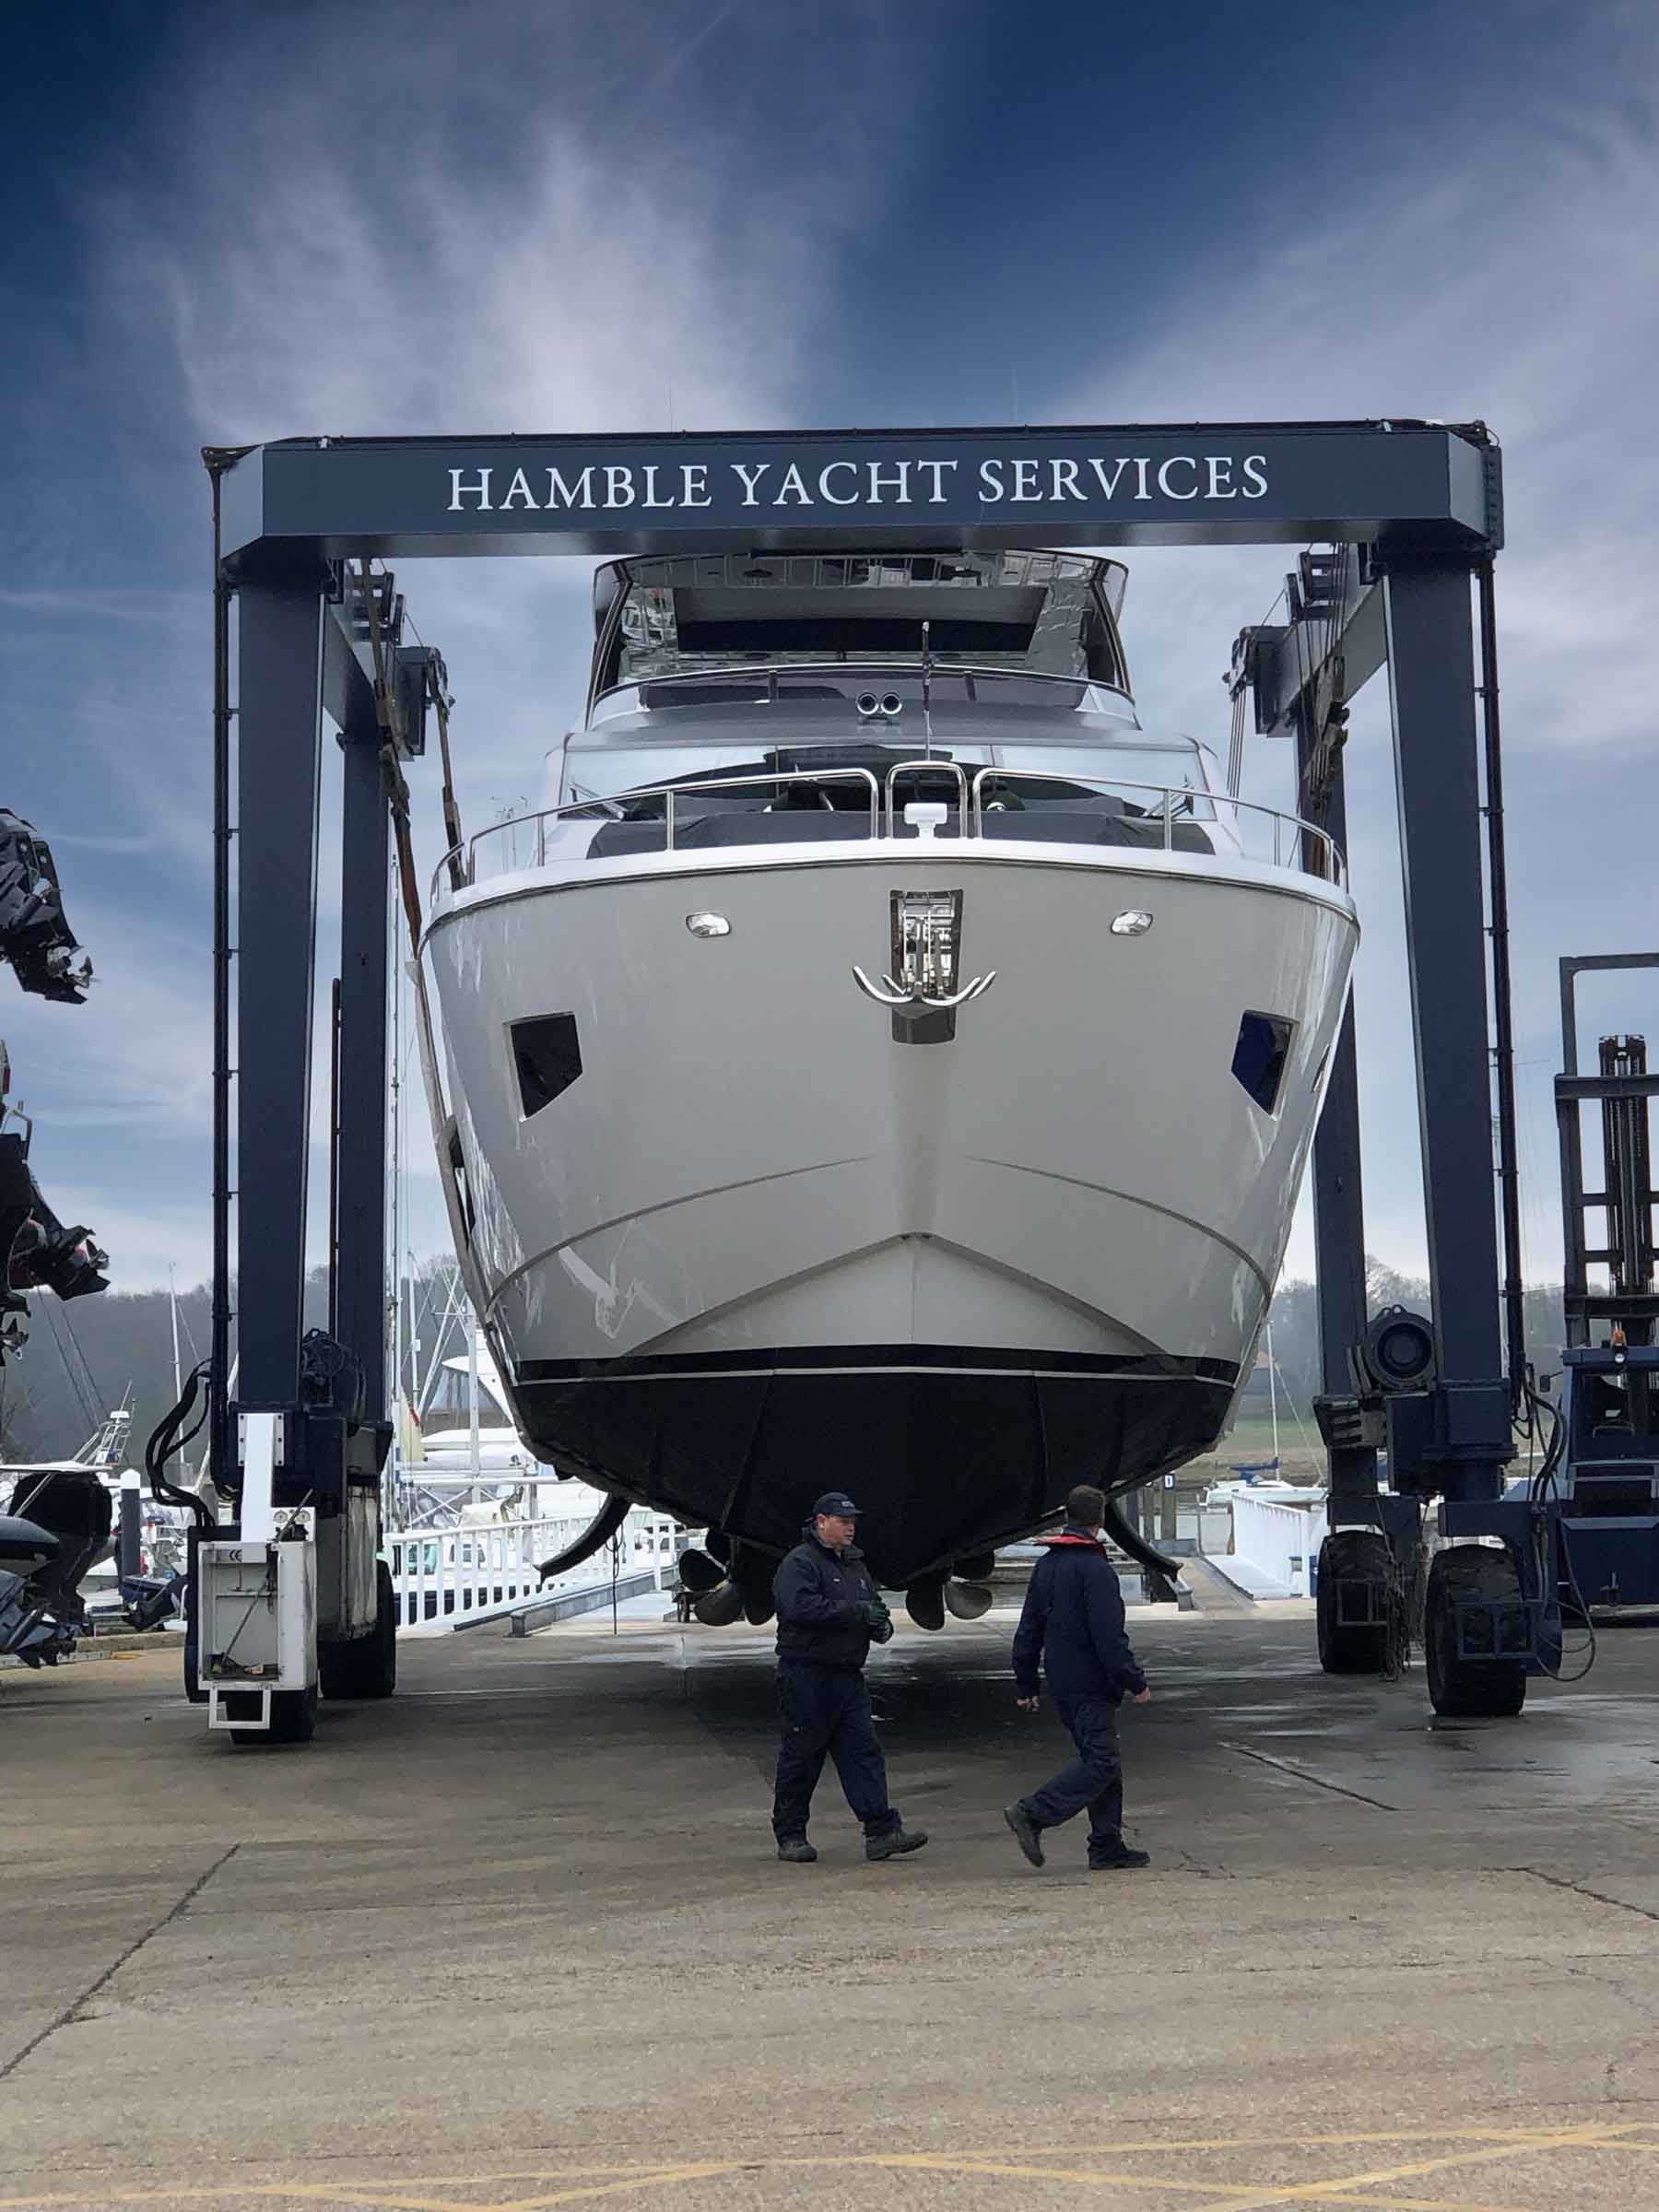 hamble yacht services limited